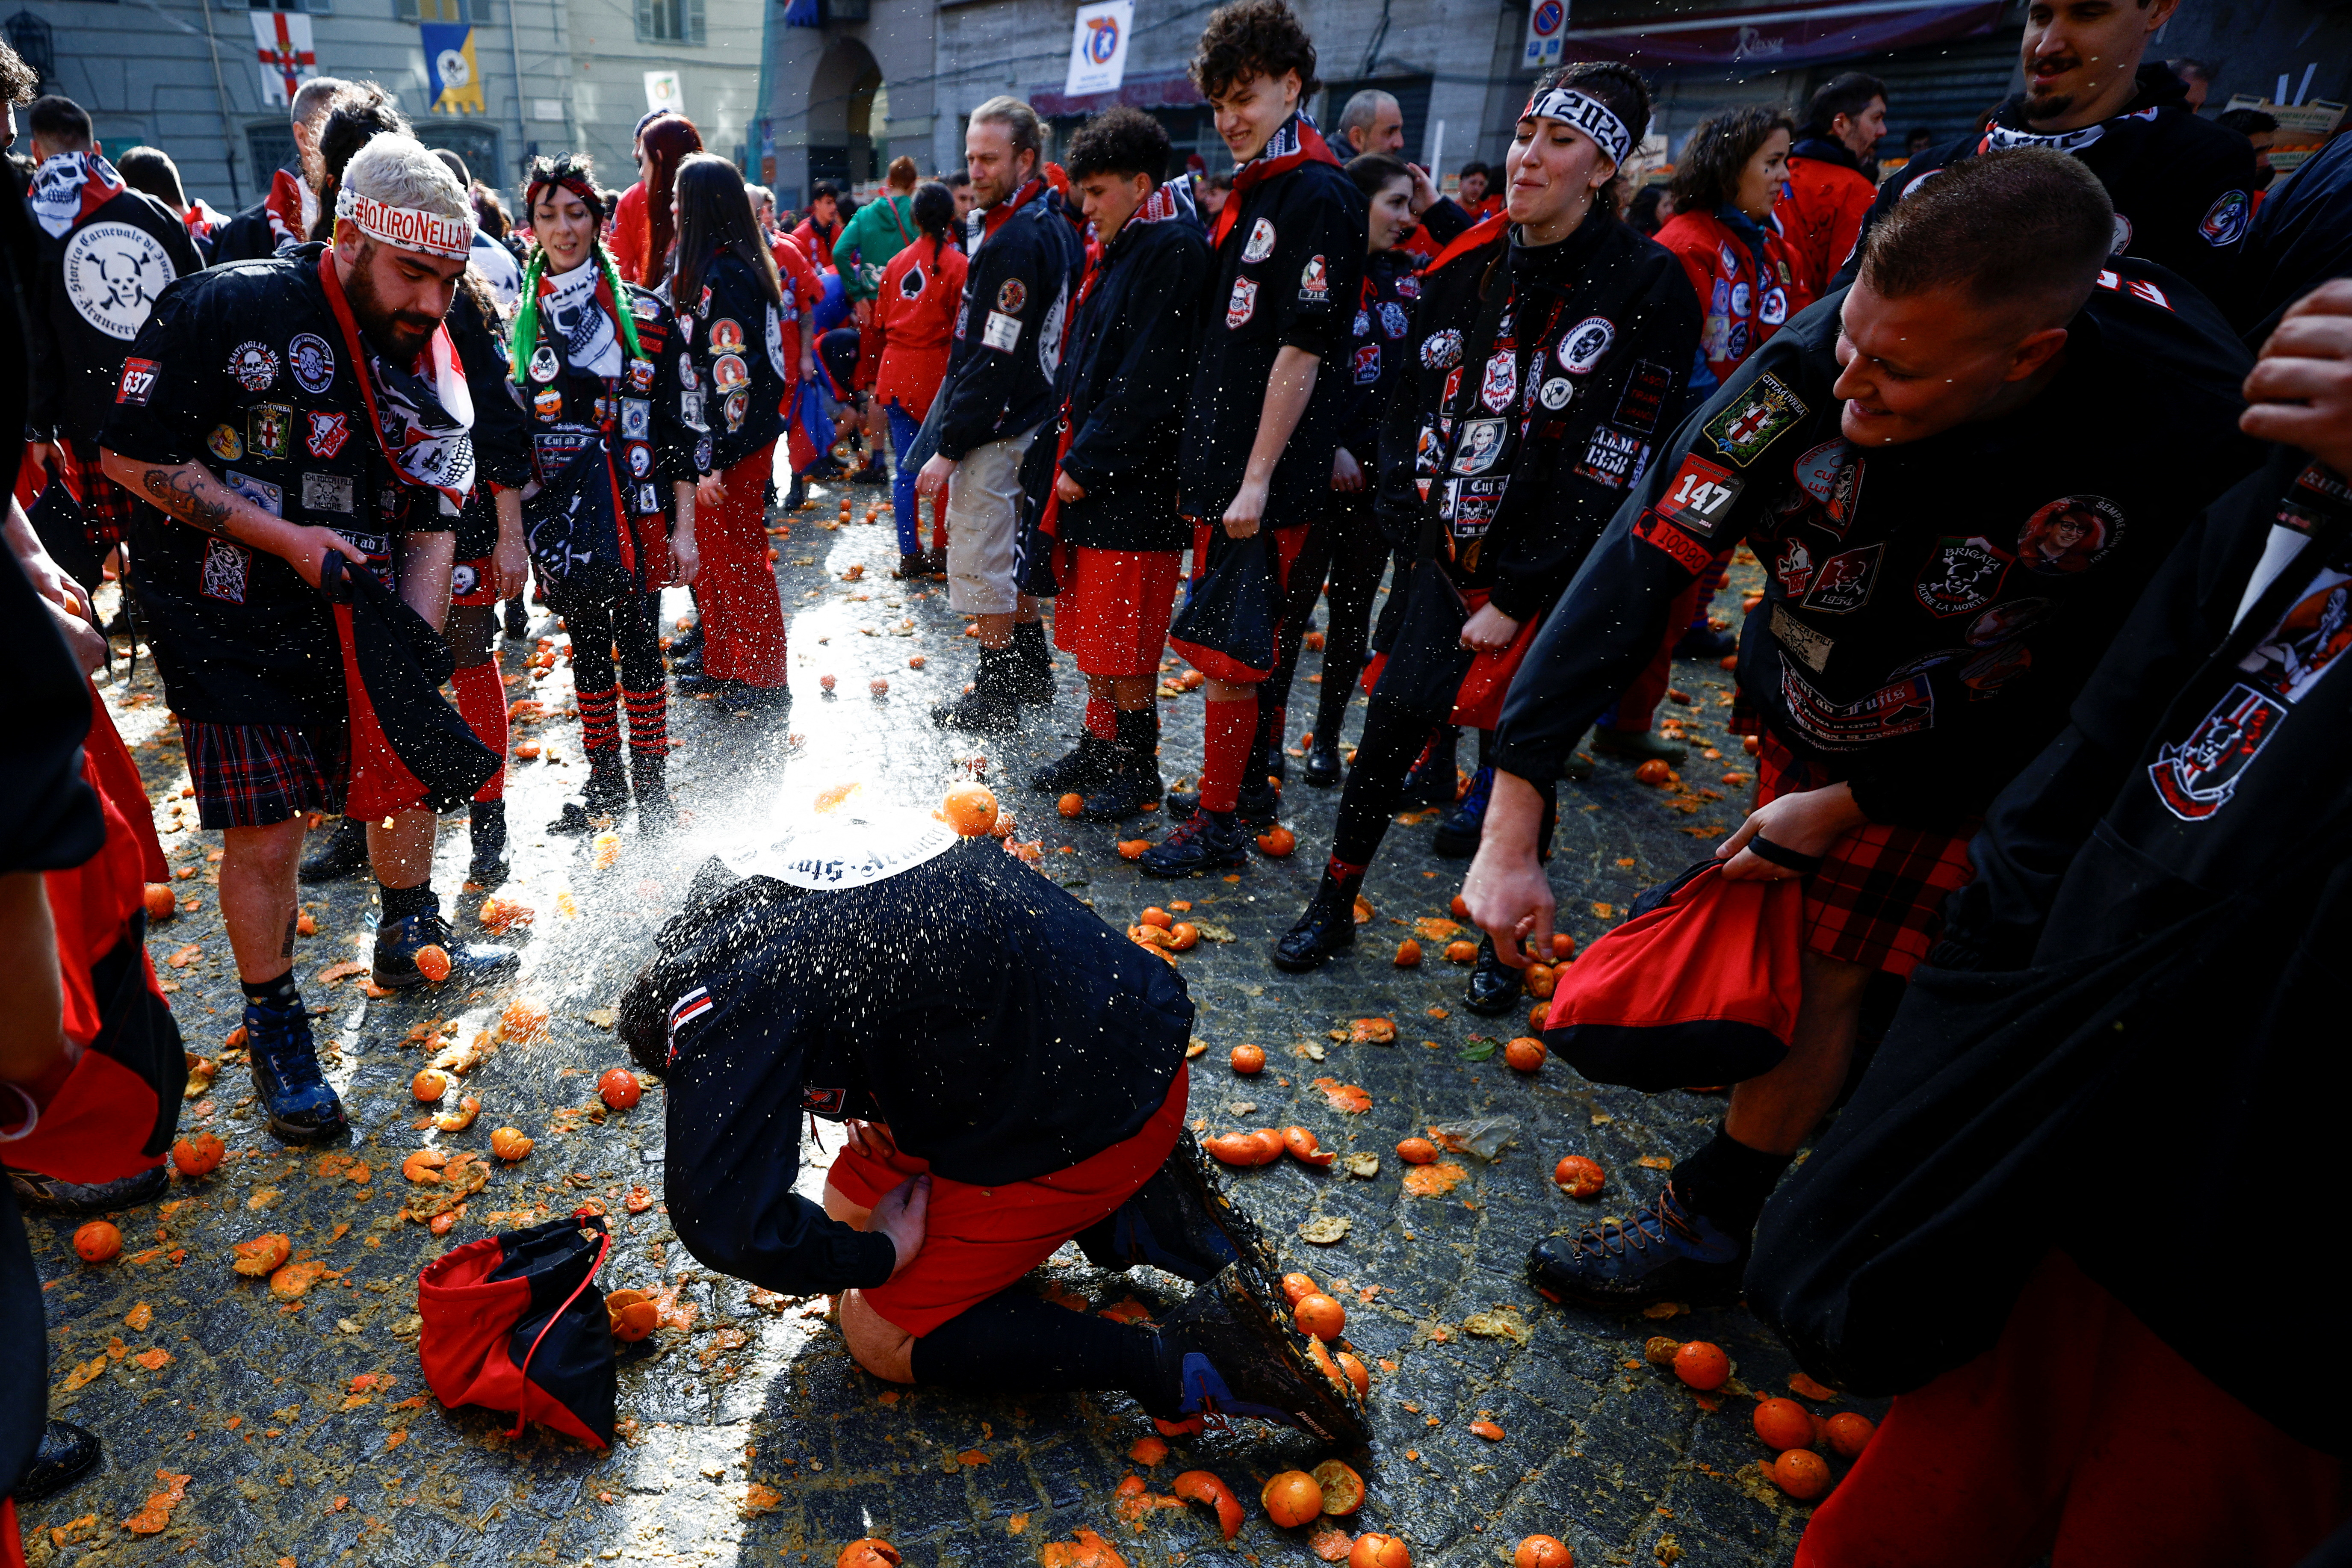 Rival teams battle with oranges to celebrate an annual carnival battle in Ivrea